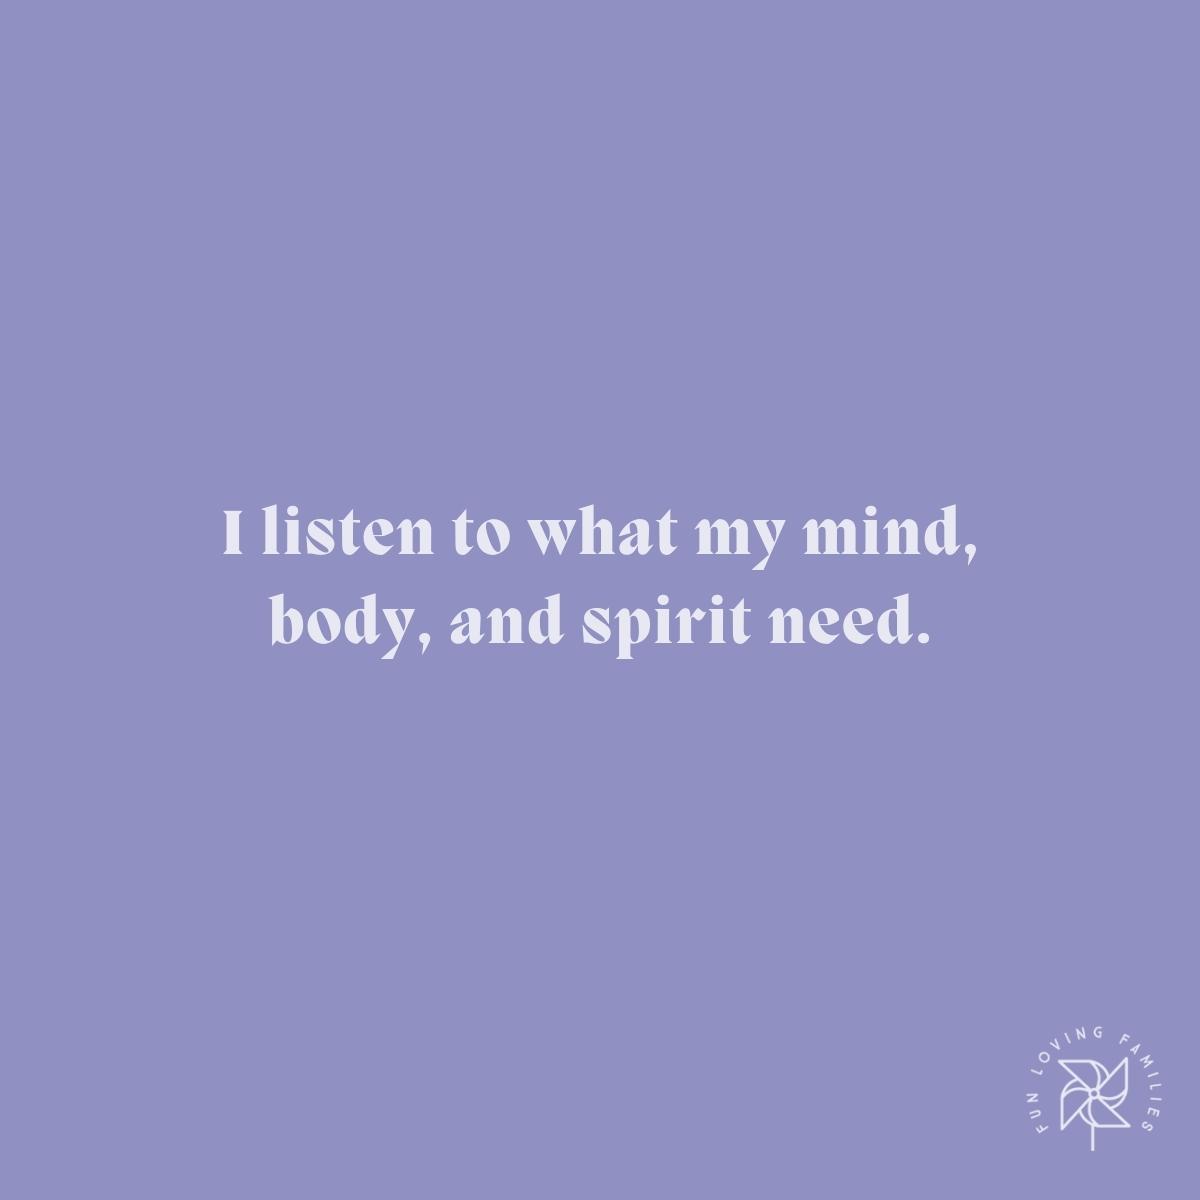 I listen to what my mind, body, and spirit need affirmation